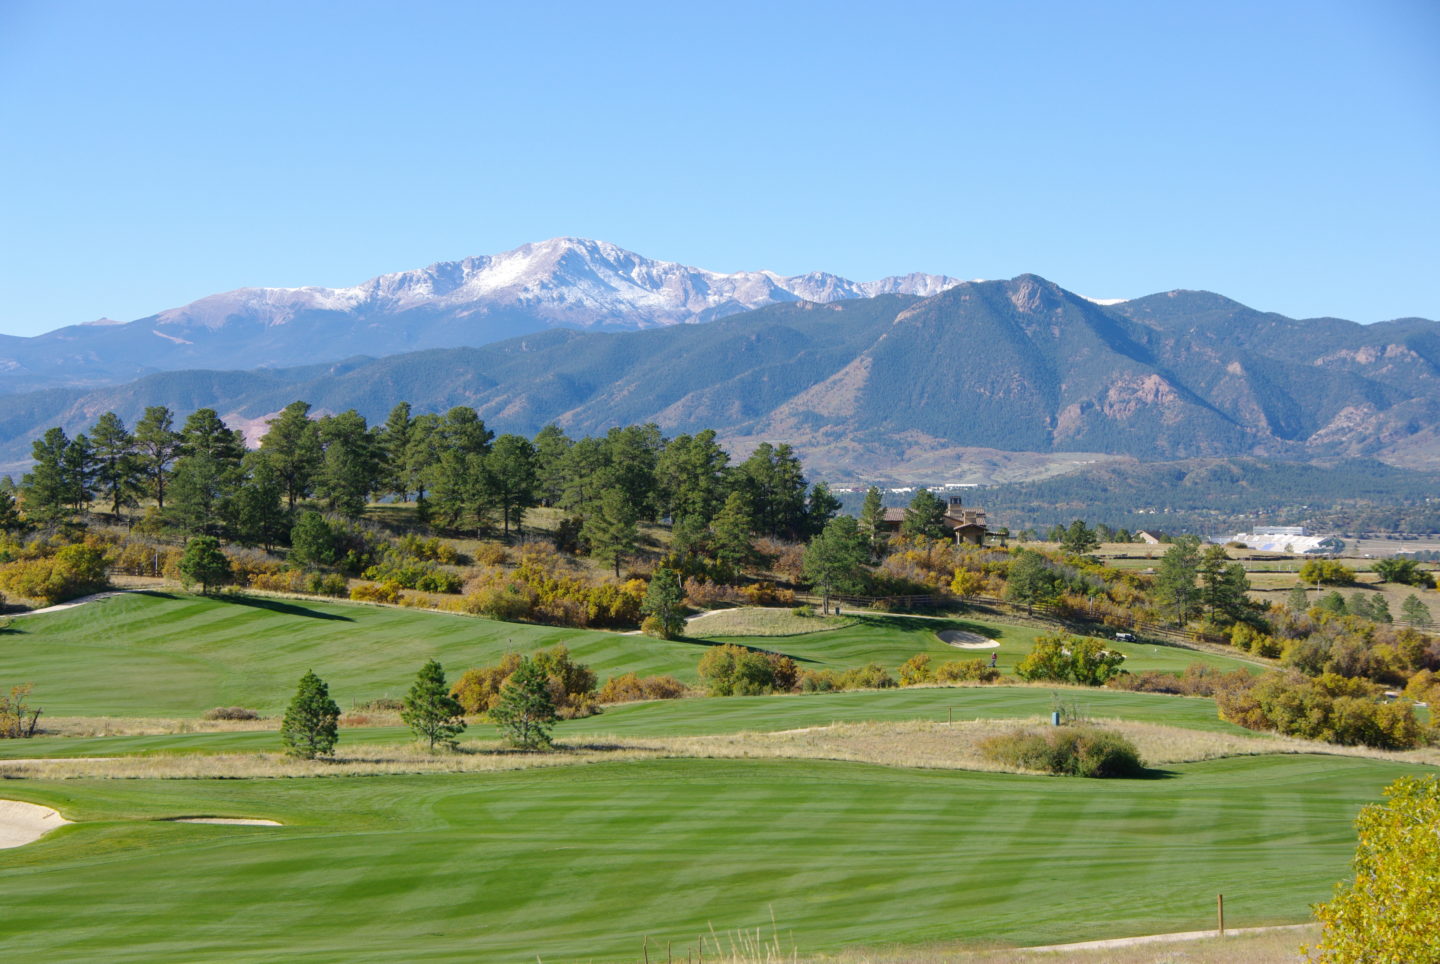 Golf course with mountains in background